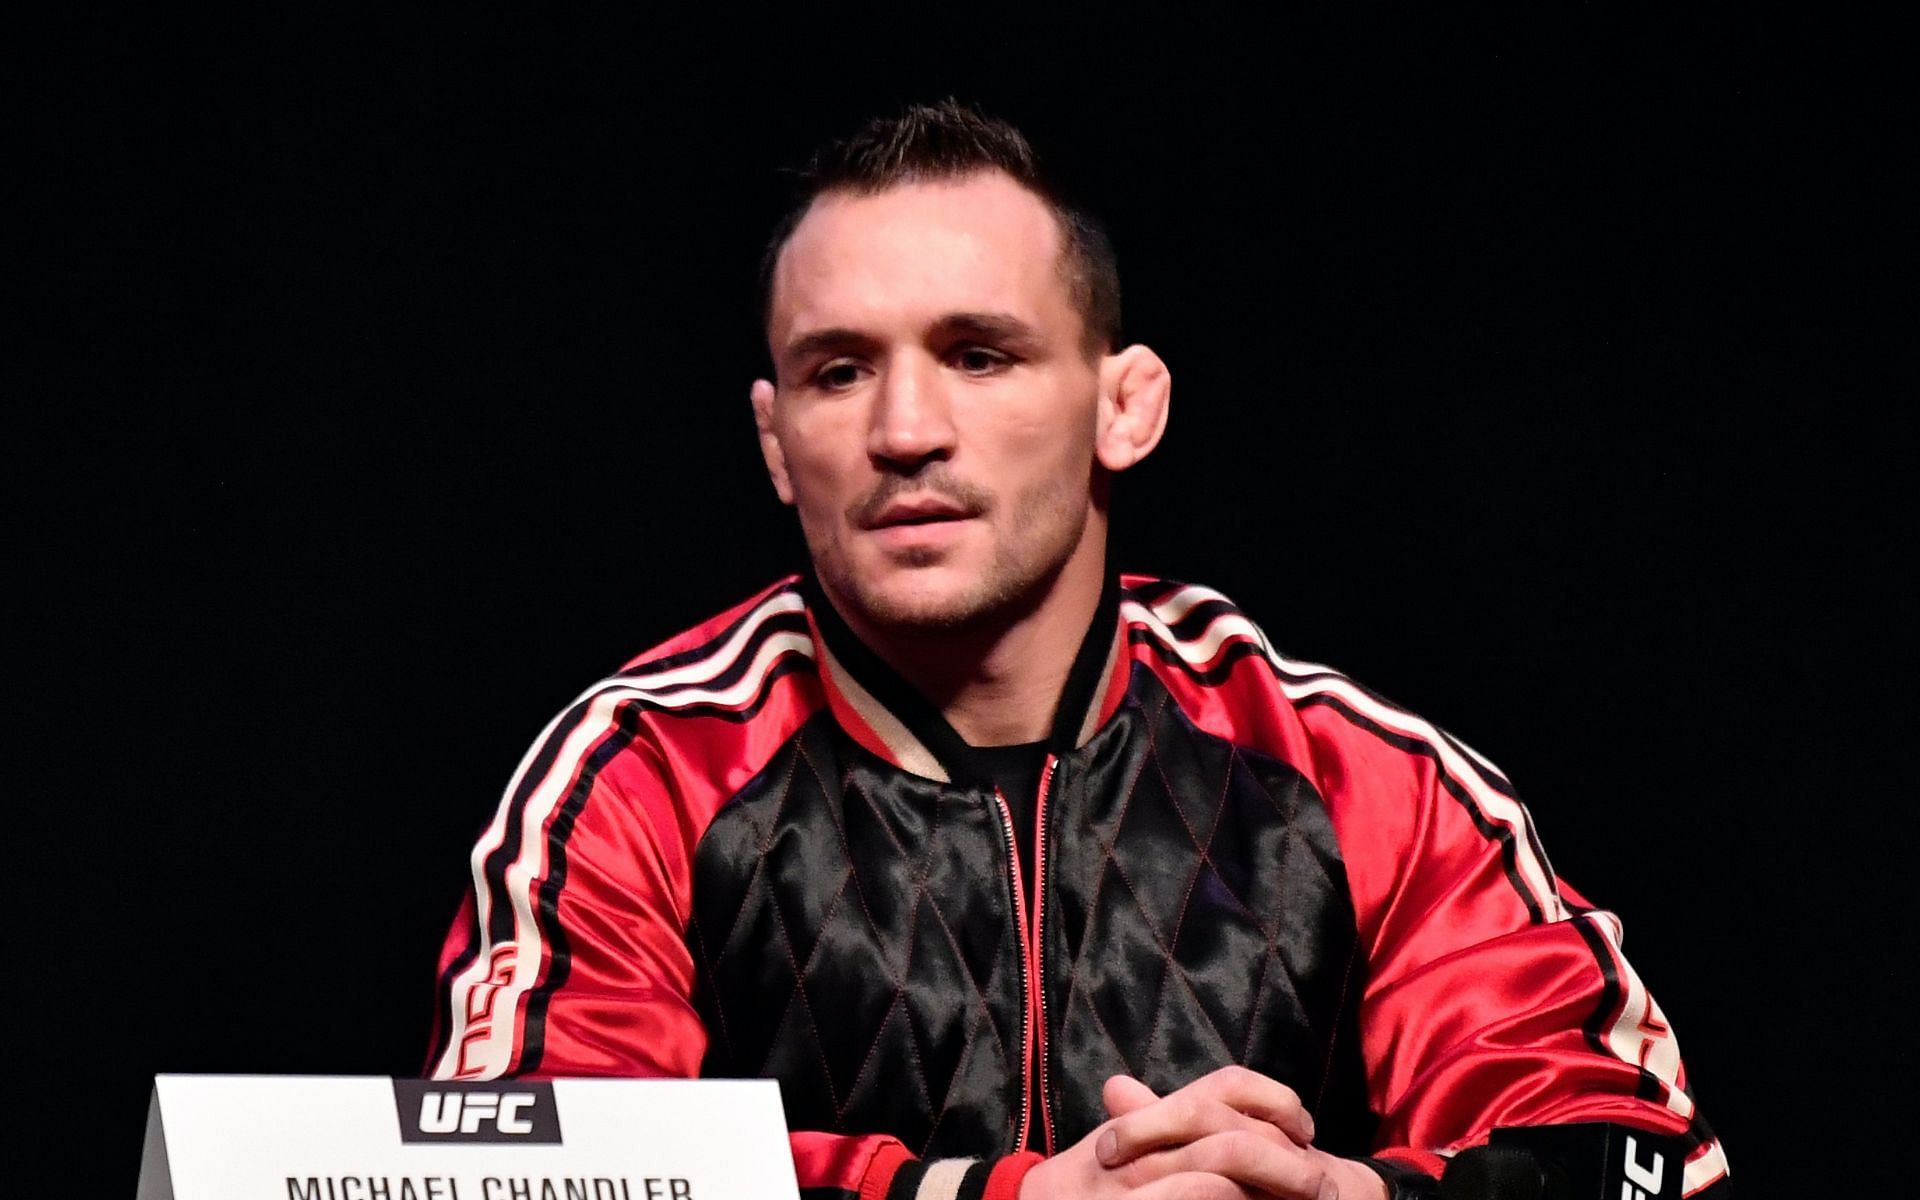 Michael Chandler [Image Credits: Getty Images]